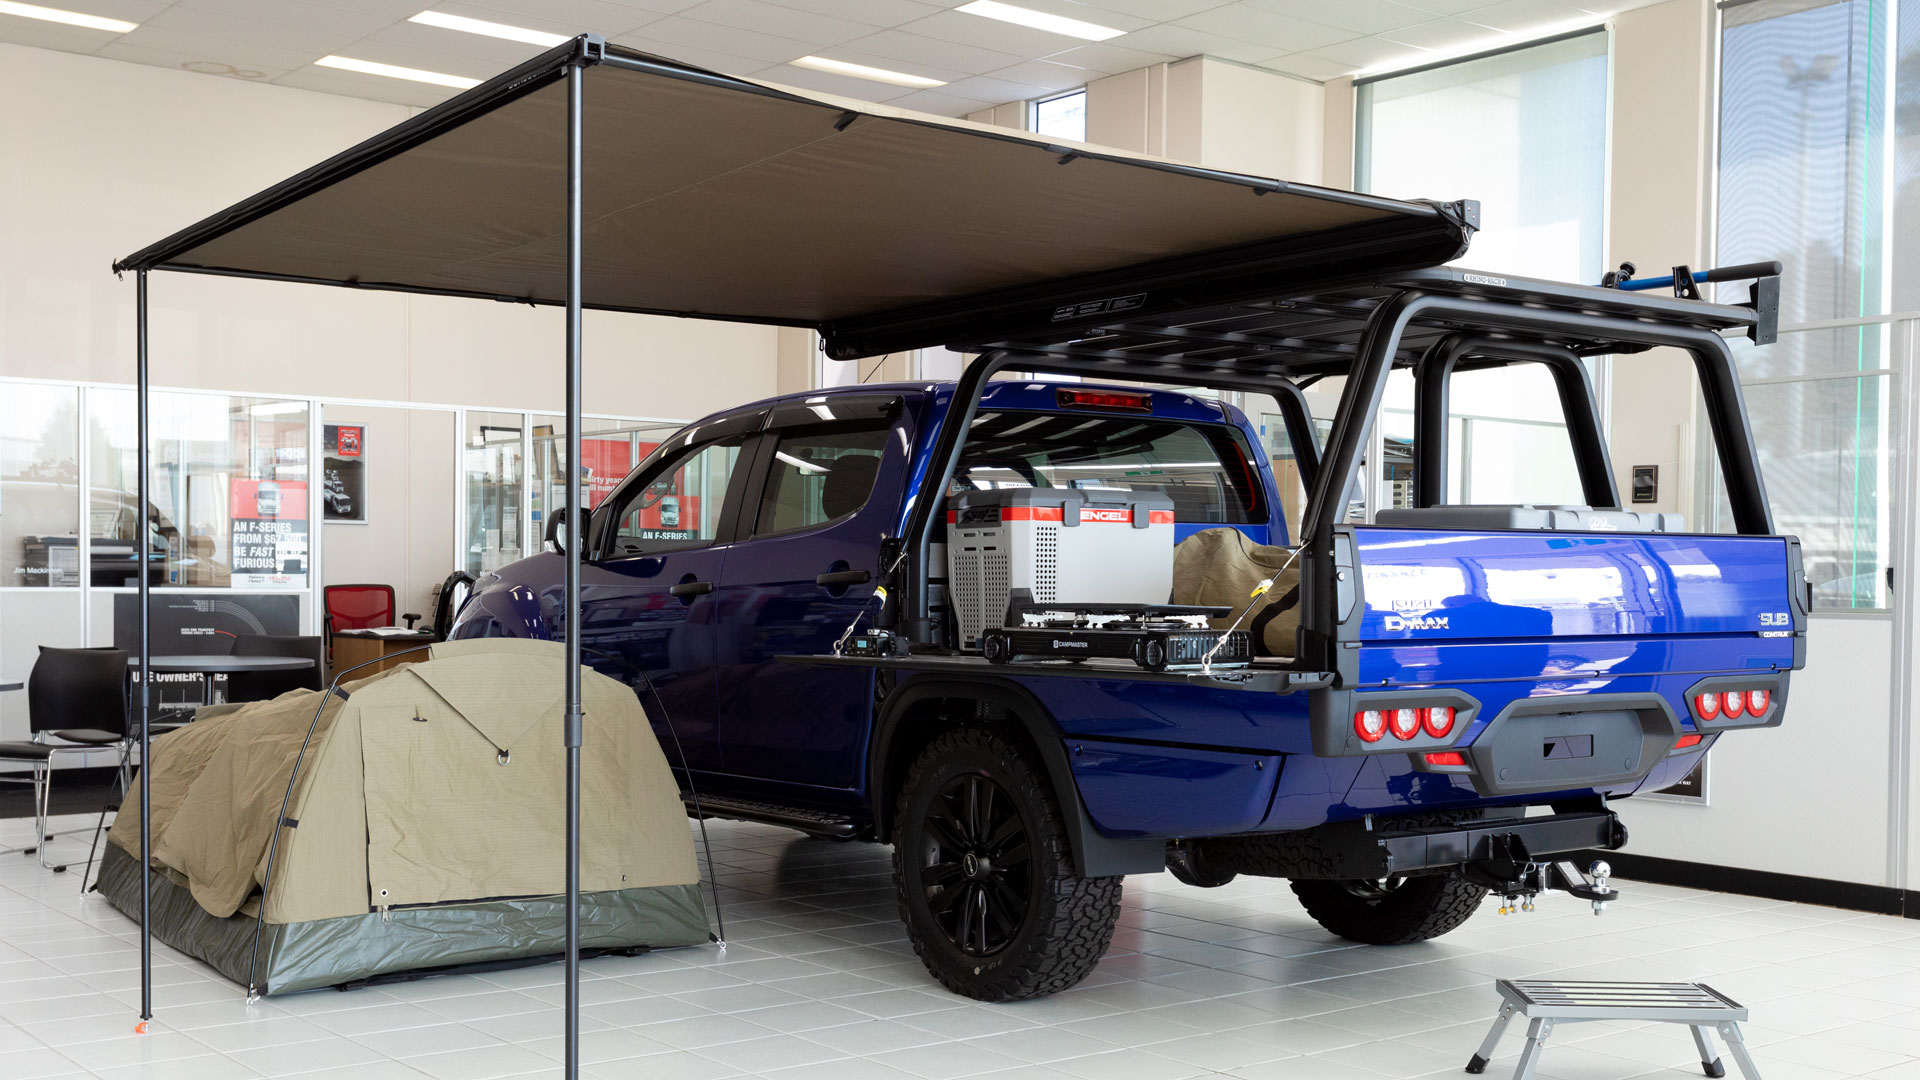 Truck with Sport Utility Bed on display in car dealership